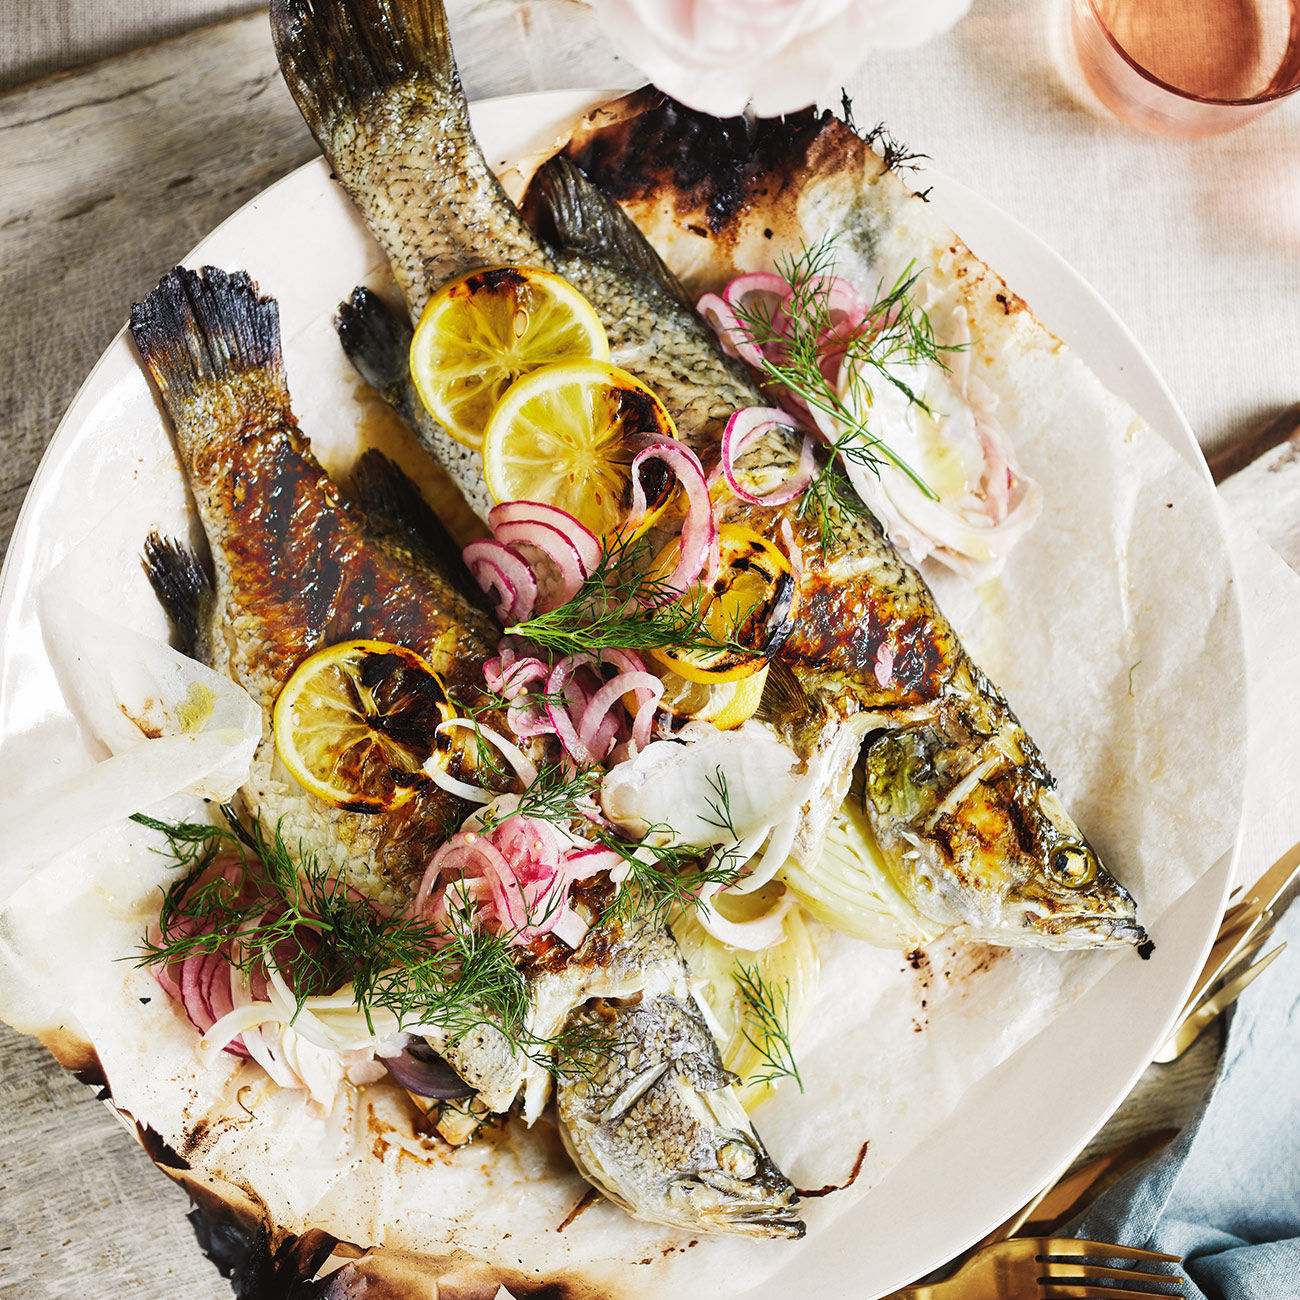 Barbecued Whole Barramundi With Fennel